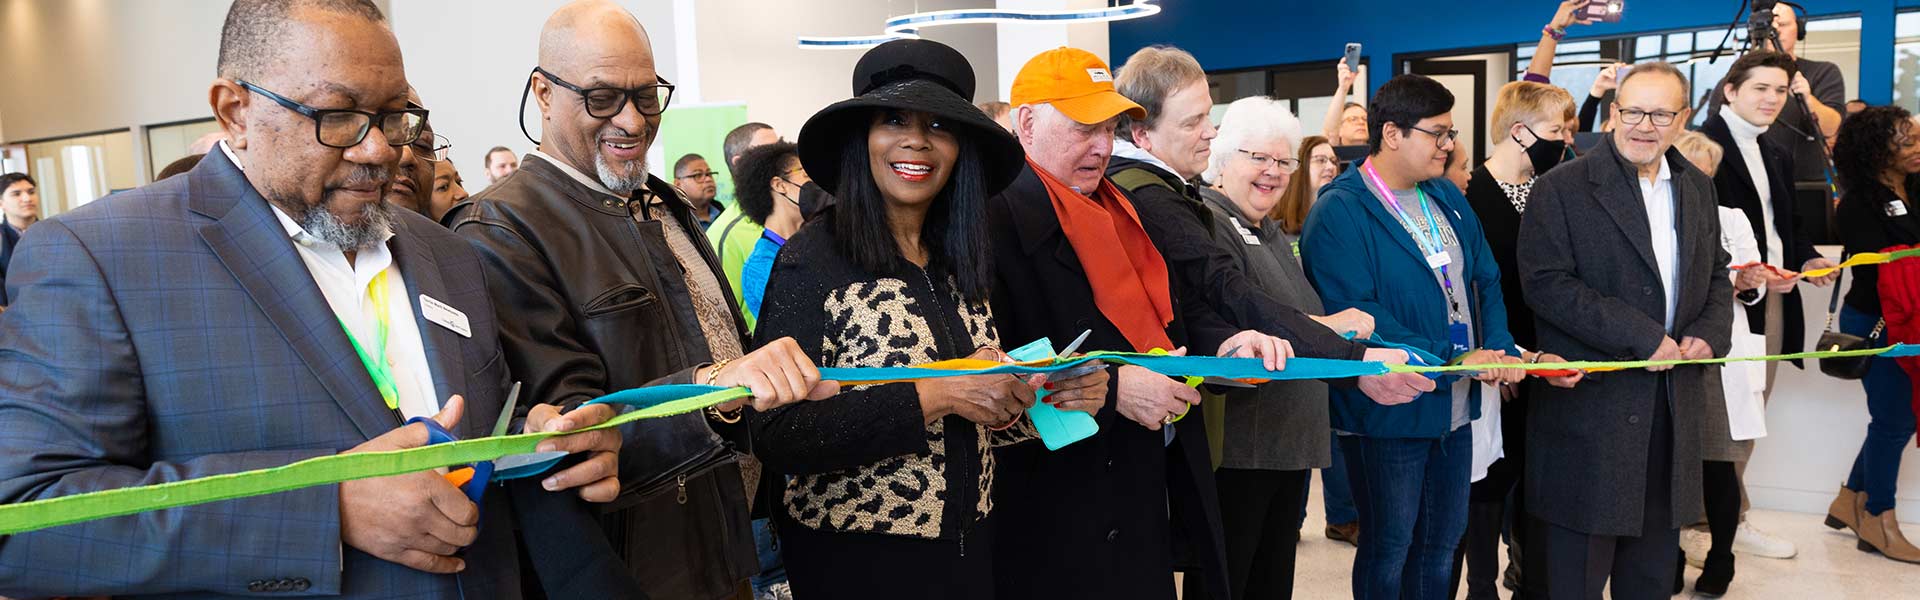 Gathering of community members cutting a ribbon at the opening of the Lakeshore Campus